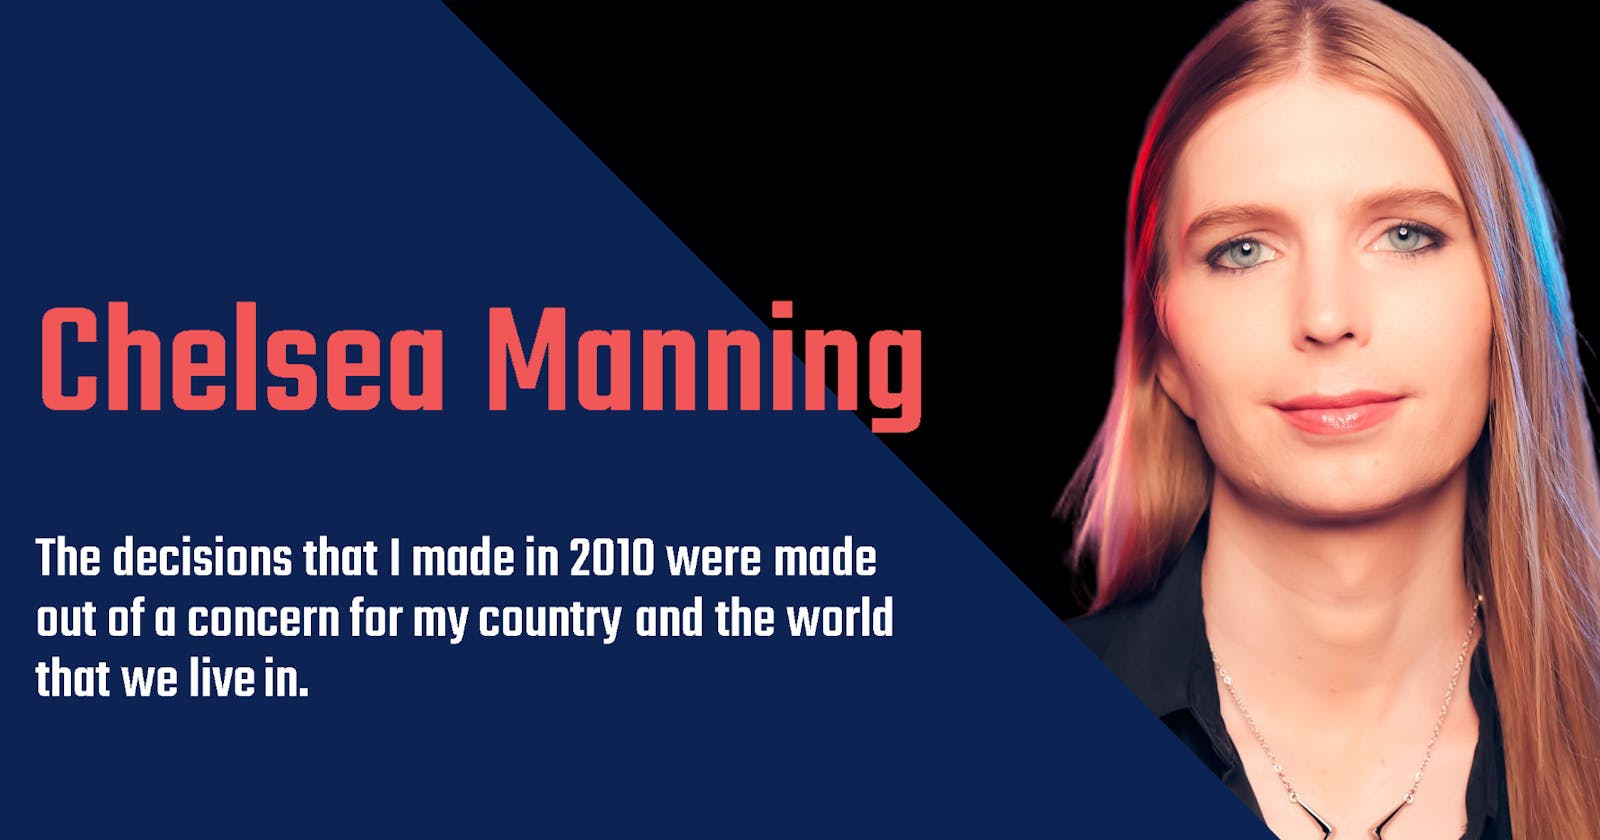 Chelsea Manning: The Whistleblower Who Changed the Course of History